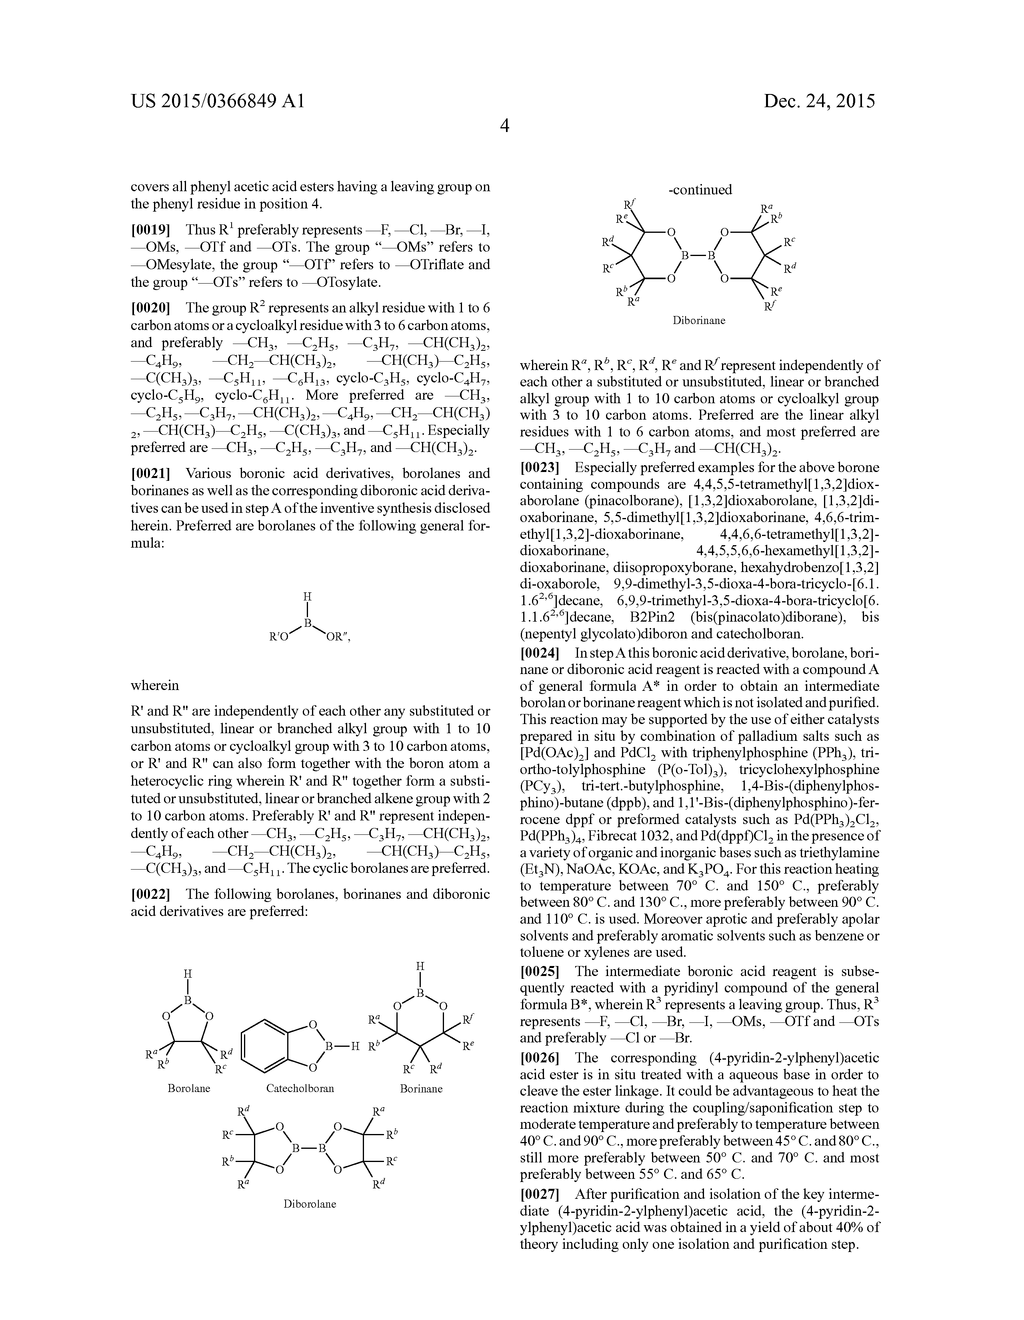 CRYSTALLINE     N-[5-(AMINOSULFONYL)-4-METHYL-1,3-THIAZOL-2-YL]-N-METHYL-2-[4-(2-PYRIDINY-    L)PHENYL]ACETAMIDE MONO MESYLATE MONOHYDRATE HAVING A SPECIFIC PARTICLE     SIZE DISTRIBUTION RANGE AND A SPECIFIC SURFACE AREA RANGE FOR USE IN     PHARMACEUTICAL FORMULATIONS - diagram, schematic, and image 18